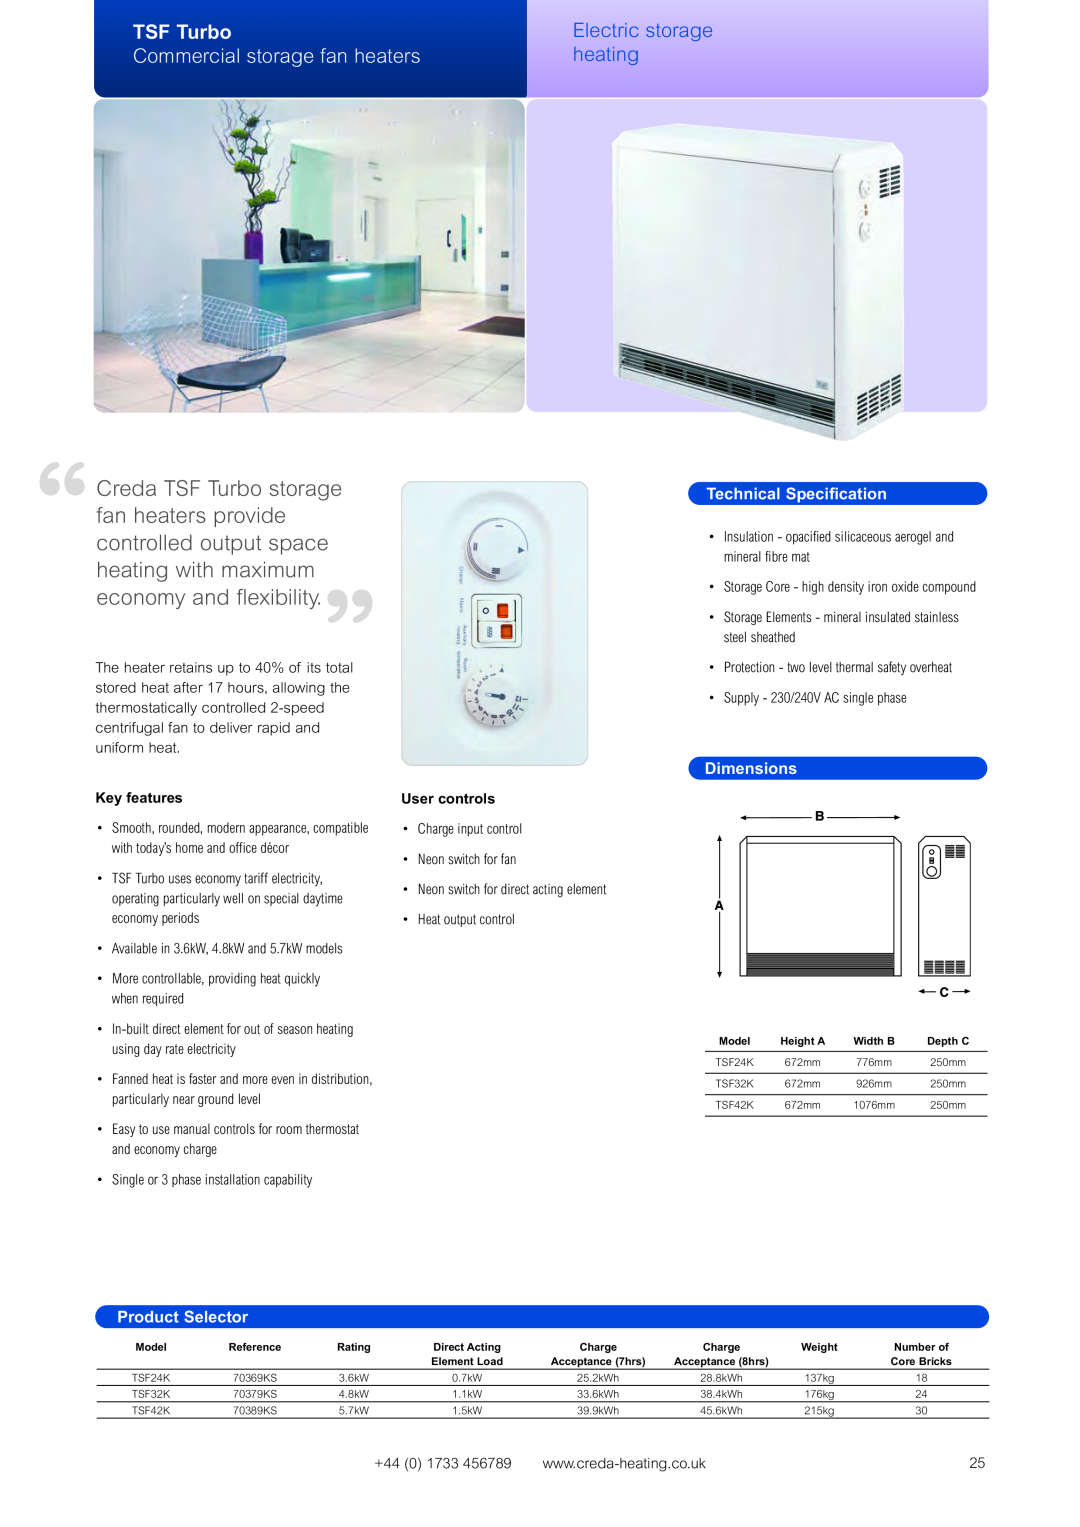 Creda Heating Solution manual TSF Turbo, Commercial storage fan heaters, Electric storage heating, Technical Specification 